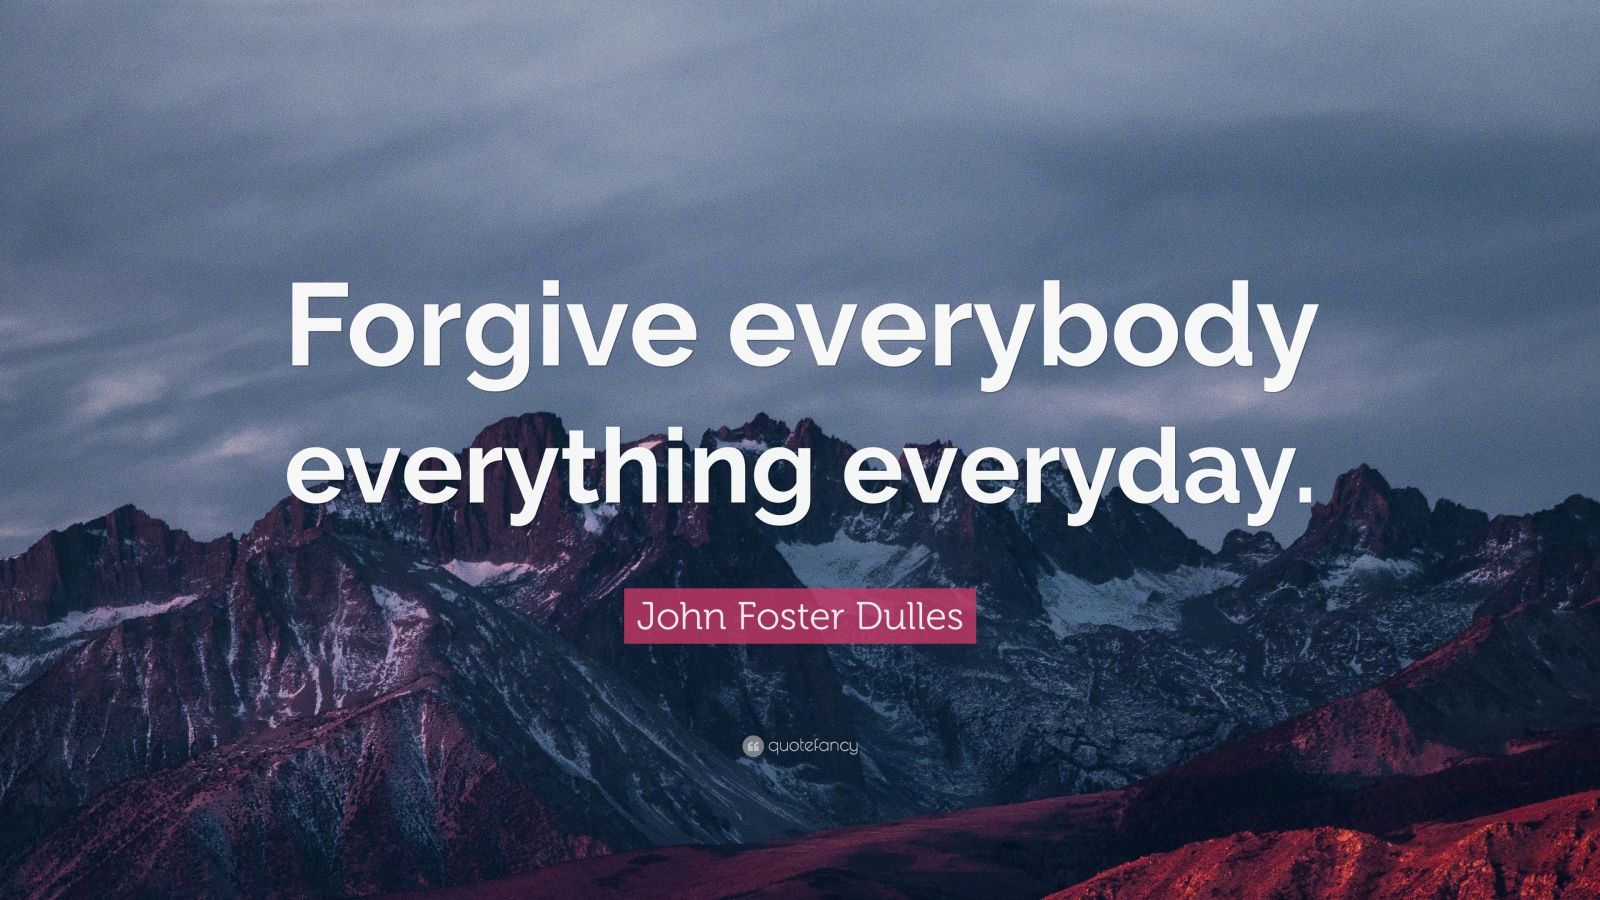 John Foster Dulles Quote: “Forgive everybody everything everyday.” (7